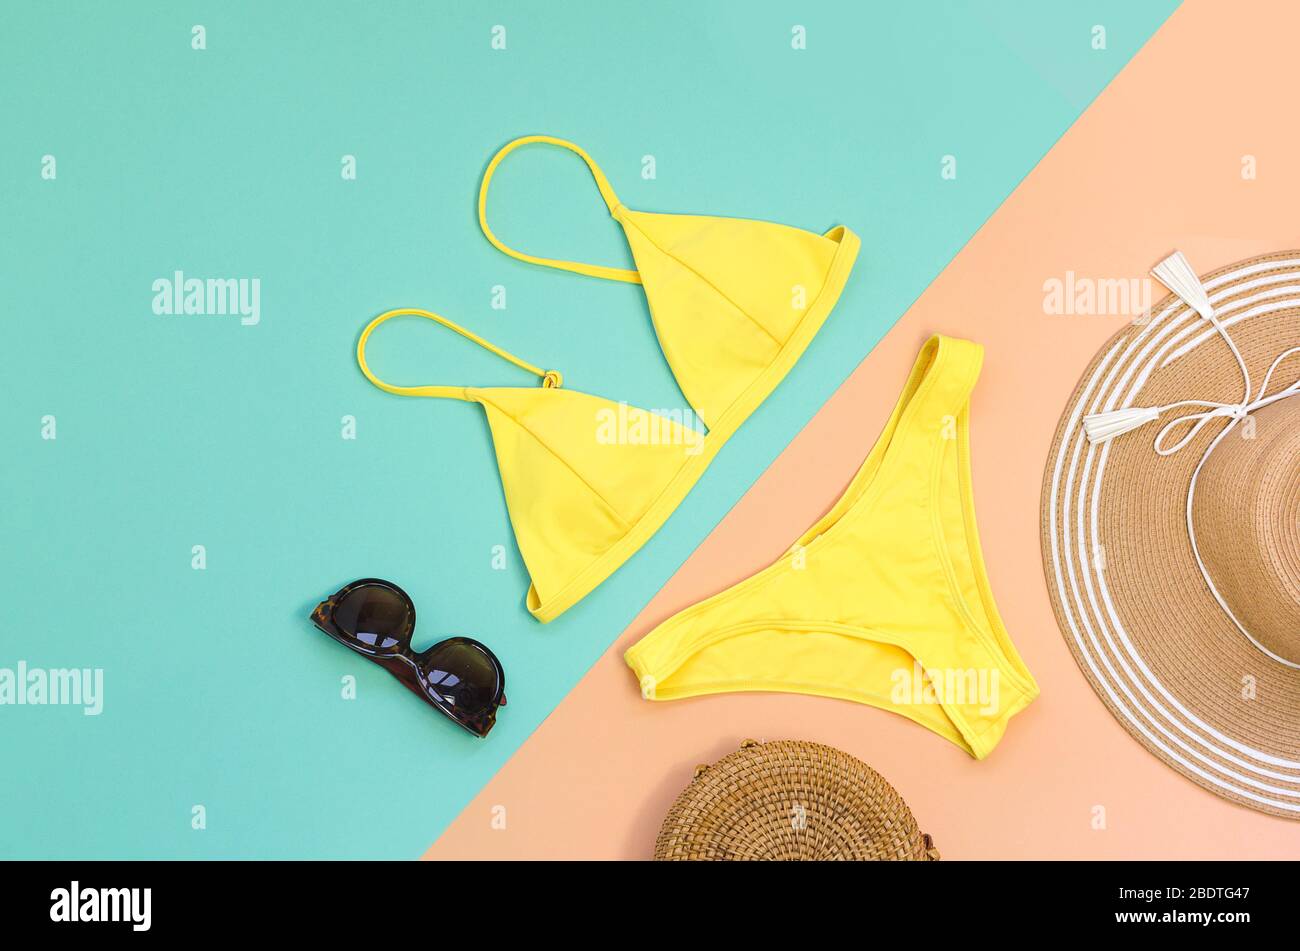 Swimming suit with sunglasses, bag and straw hat for summer. Flatlay Stock Photo